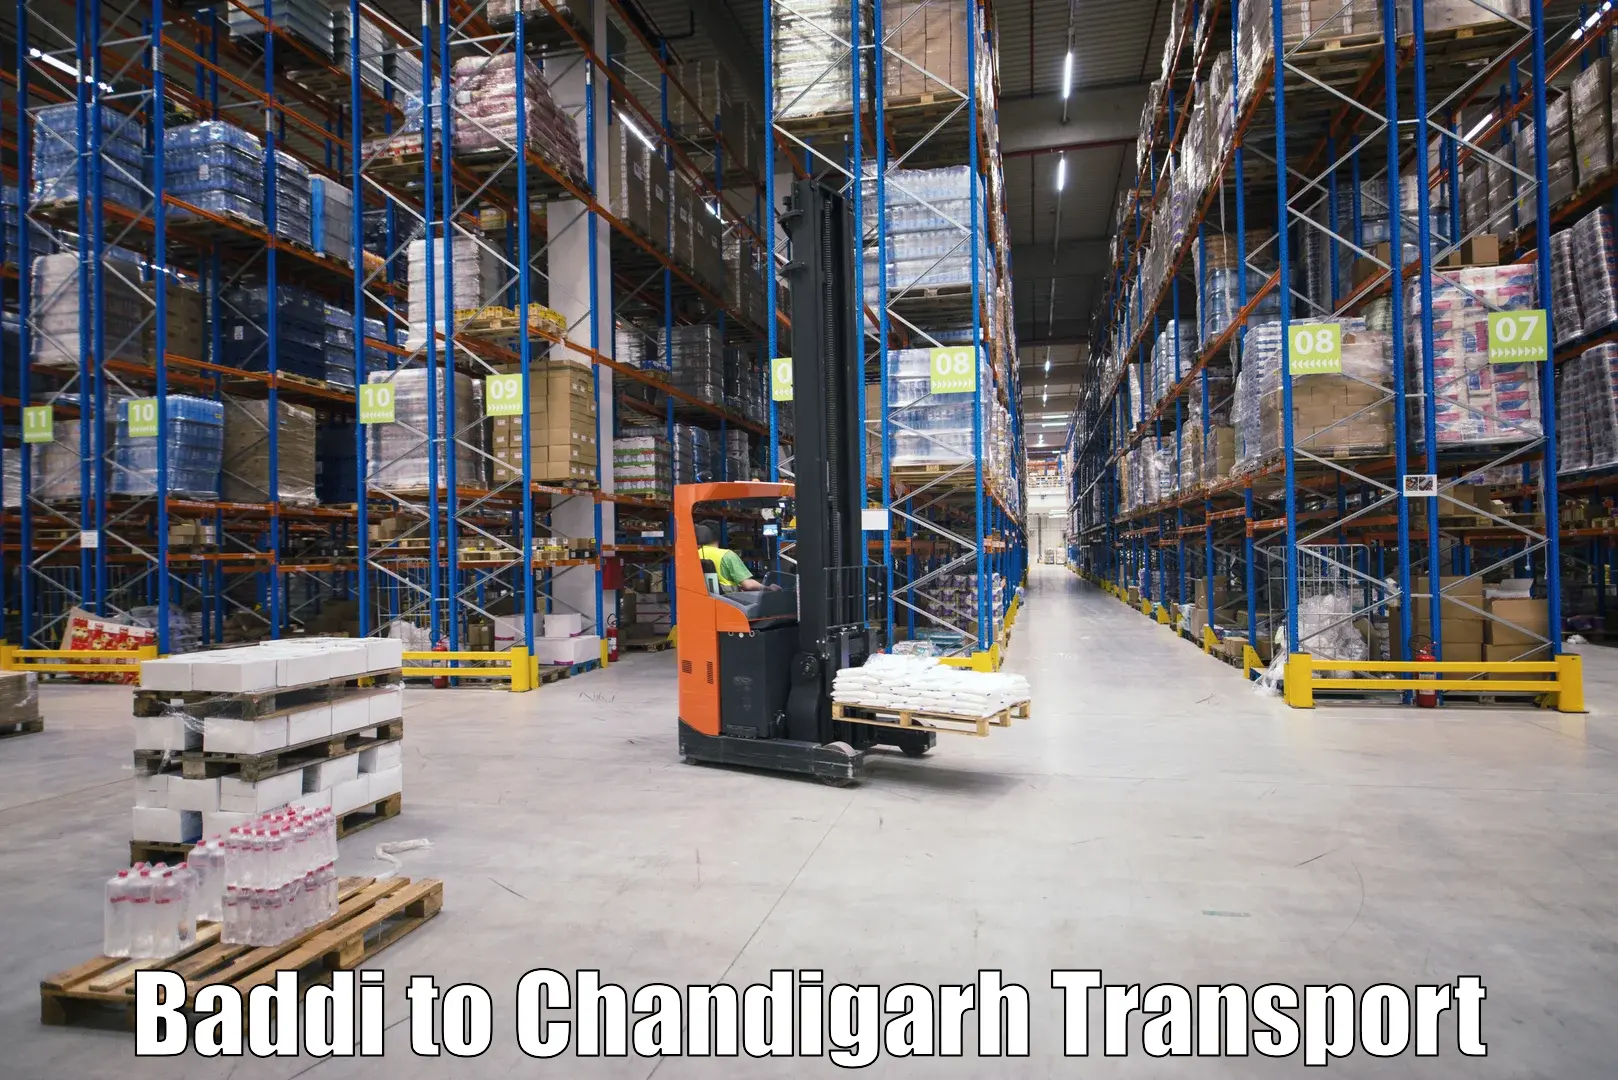 Transport bike from one state to another Baddi to Chandigarh